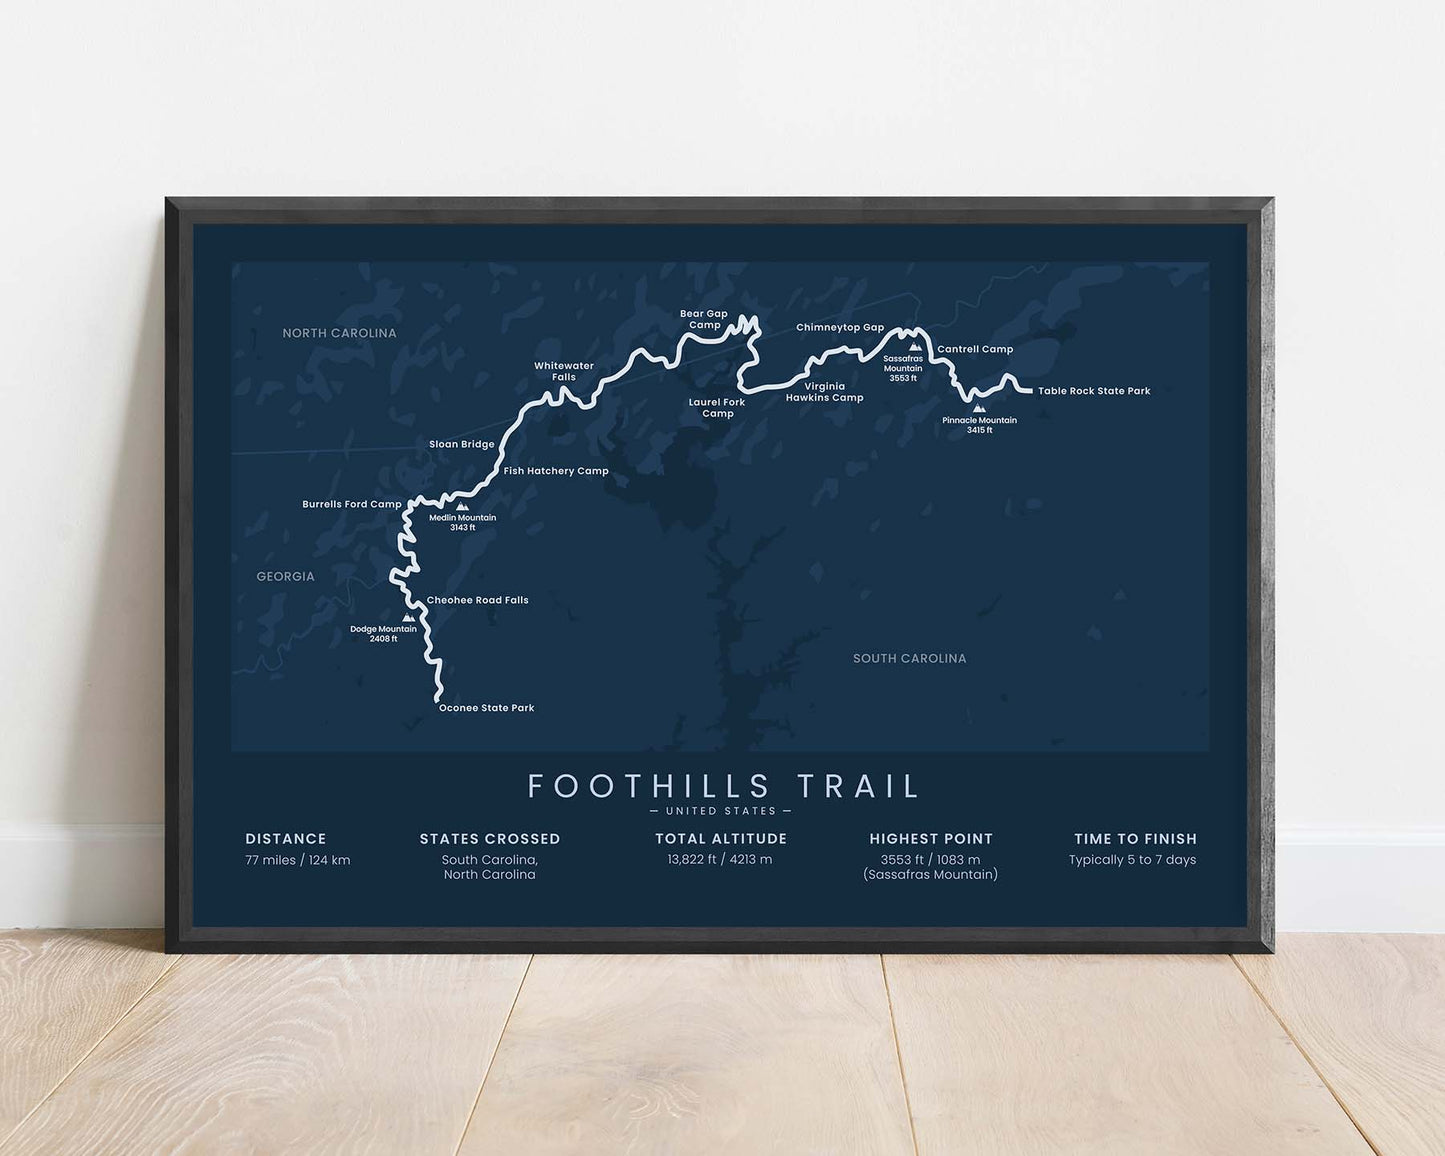 Foothills National Recreation Trail (Sumter National Forest) Thru-Hike Wall Art with Blue Background in Minimal Room Decor